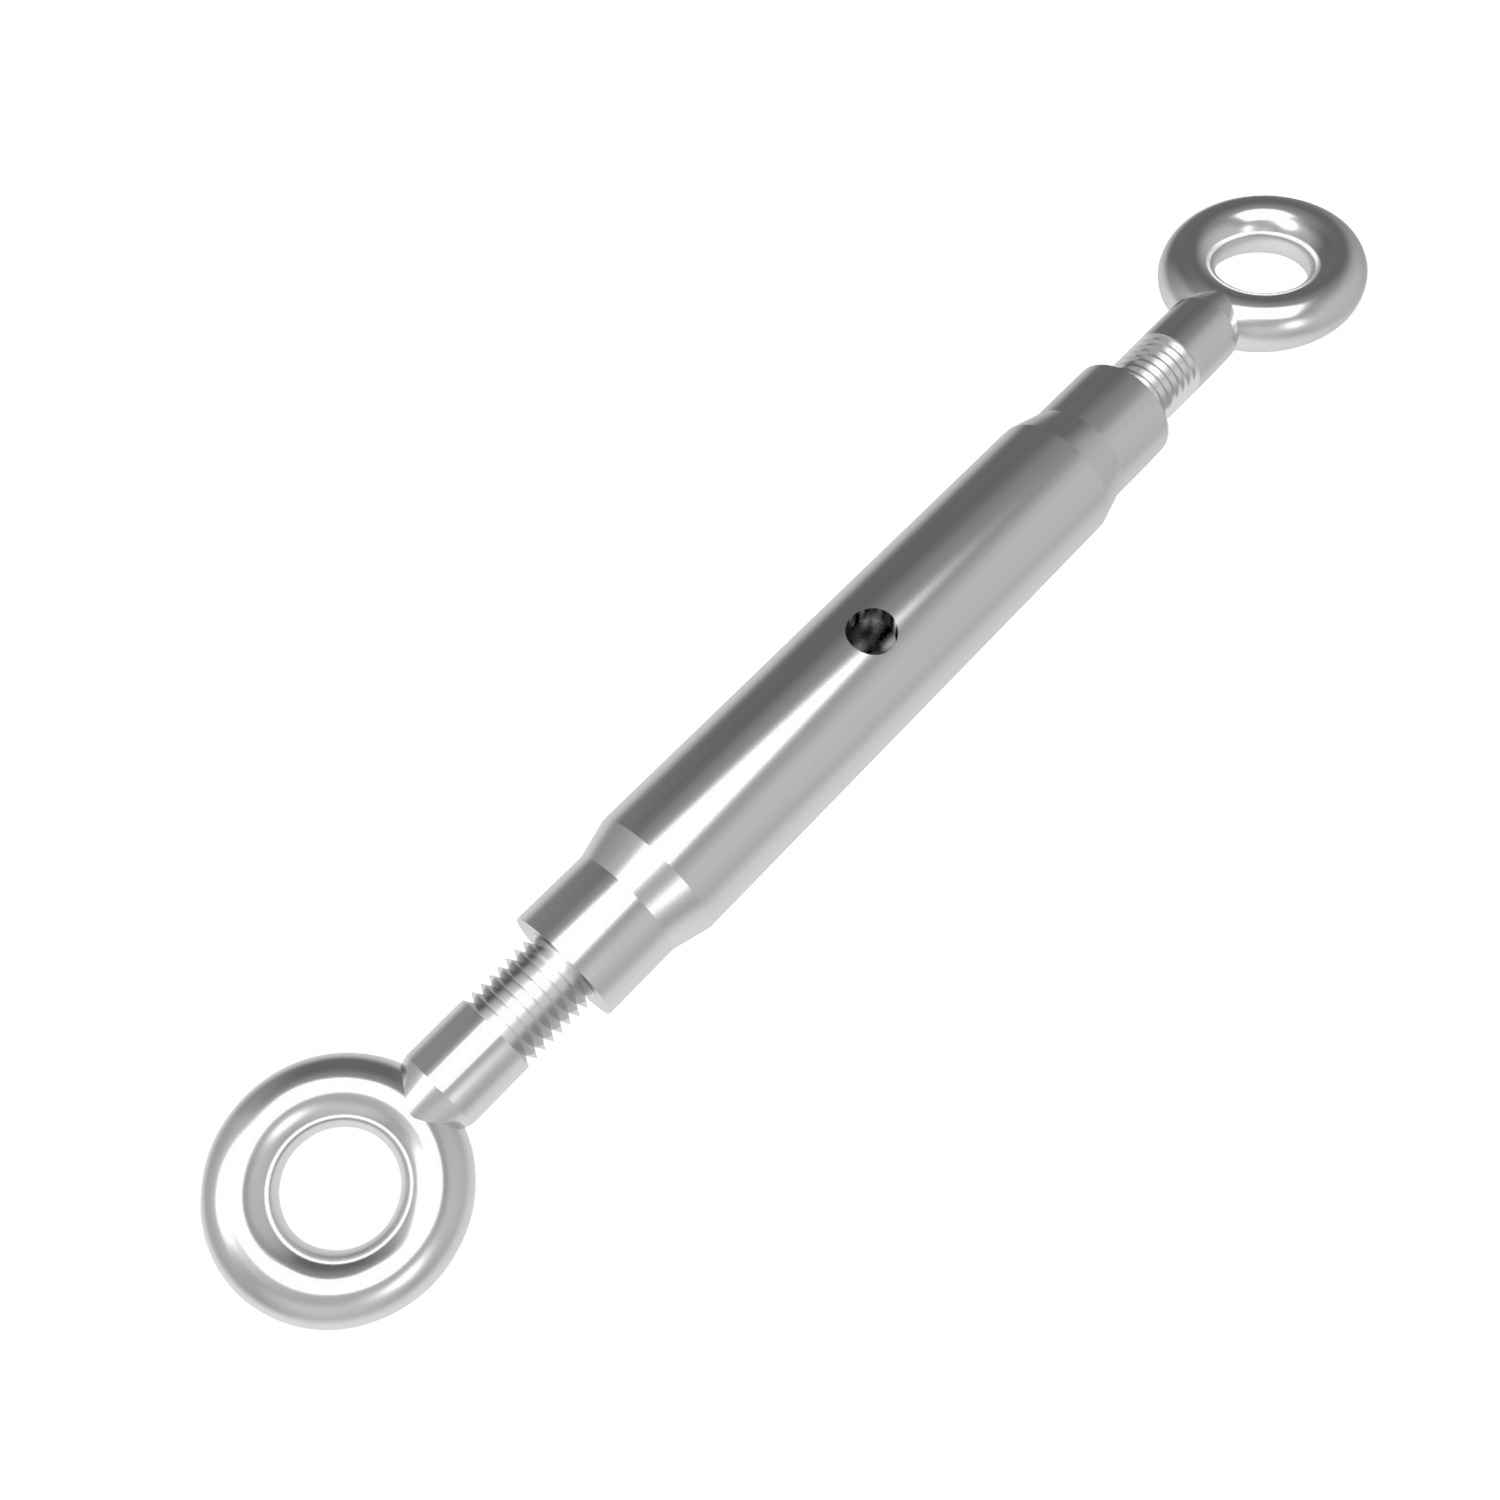 Eye End Pipe Body Turnbuckles A4 Stainless steel turnbuckles with eye end. Manufactured to DIN 1478. Sizes ranging from M6 to M20. Lengths from 110mm to 200mm.